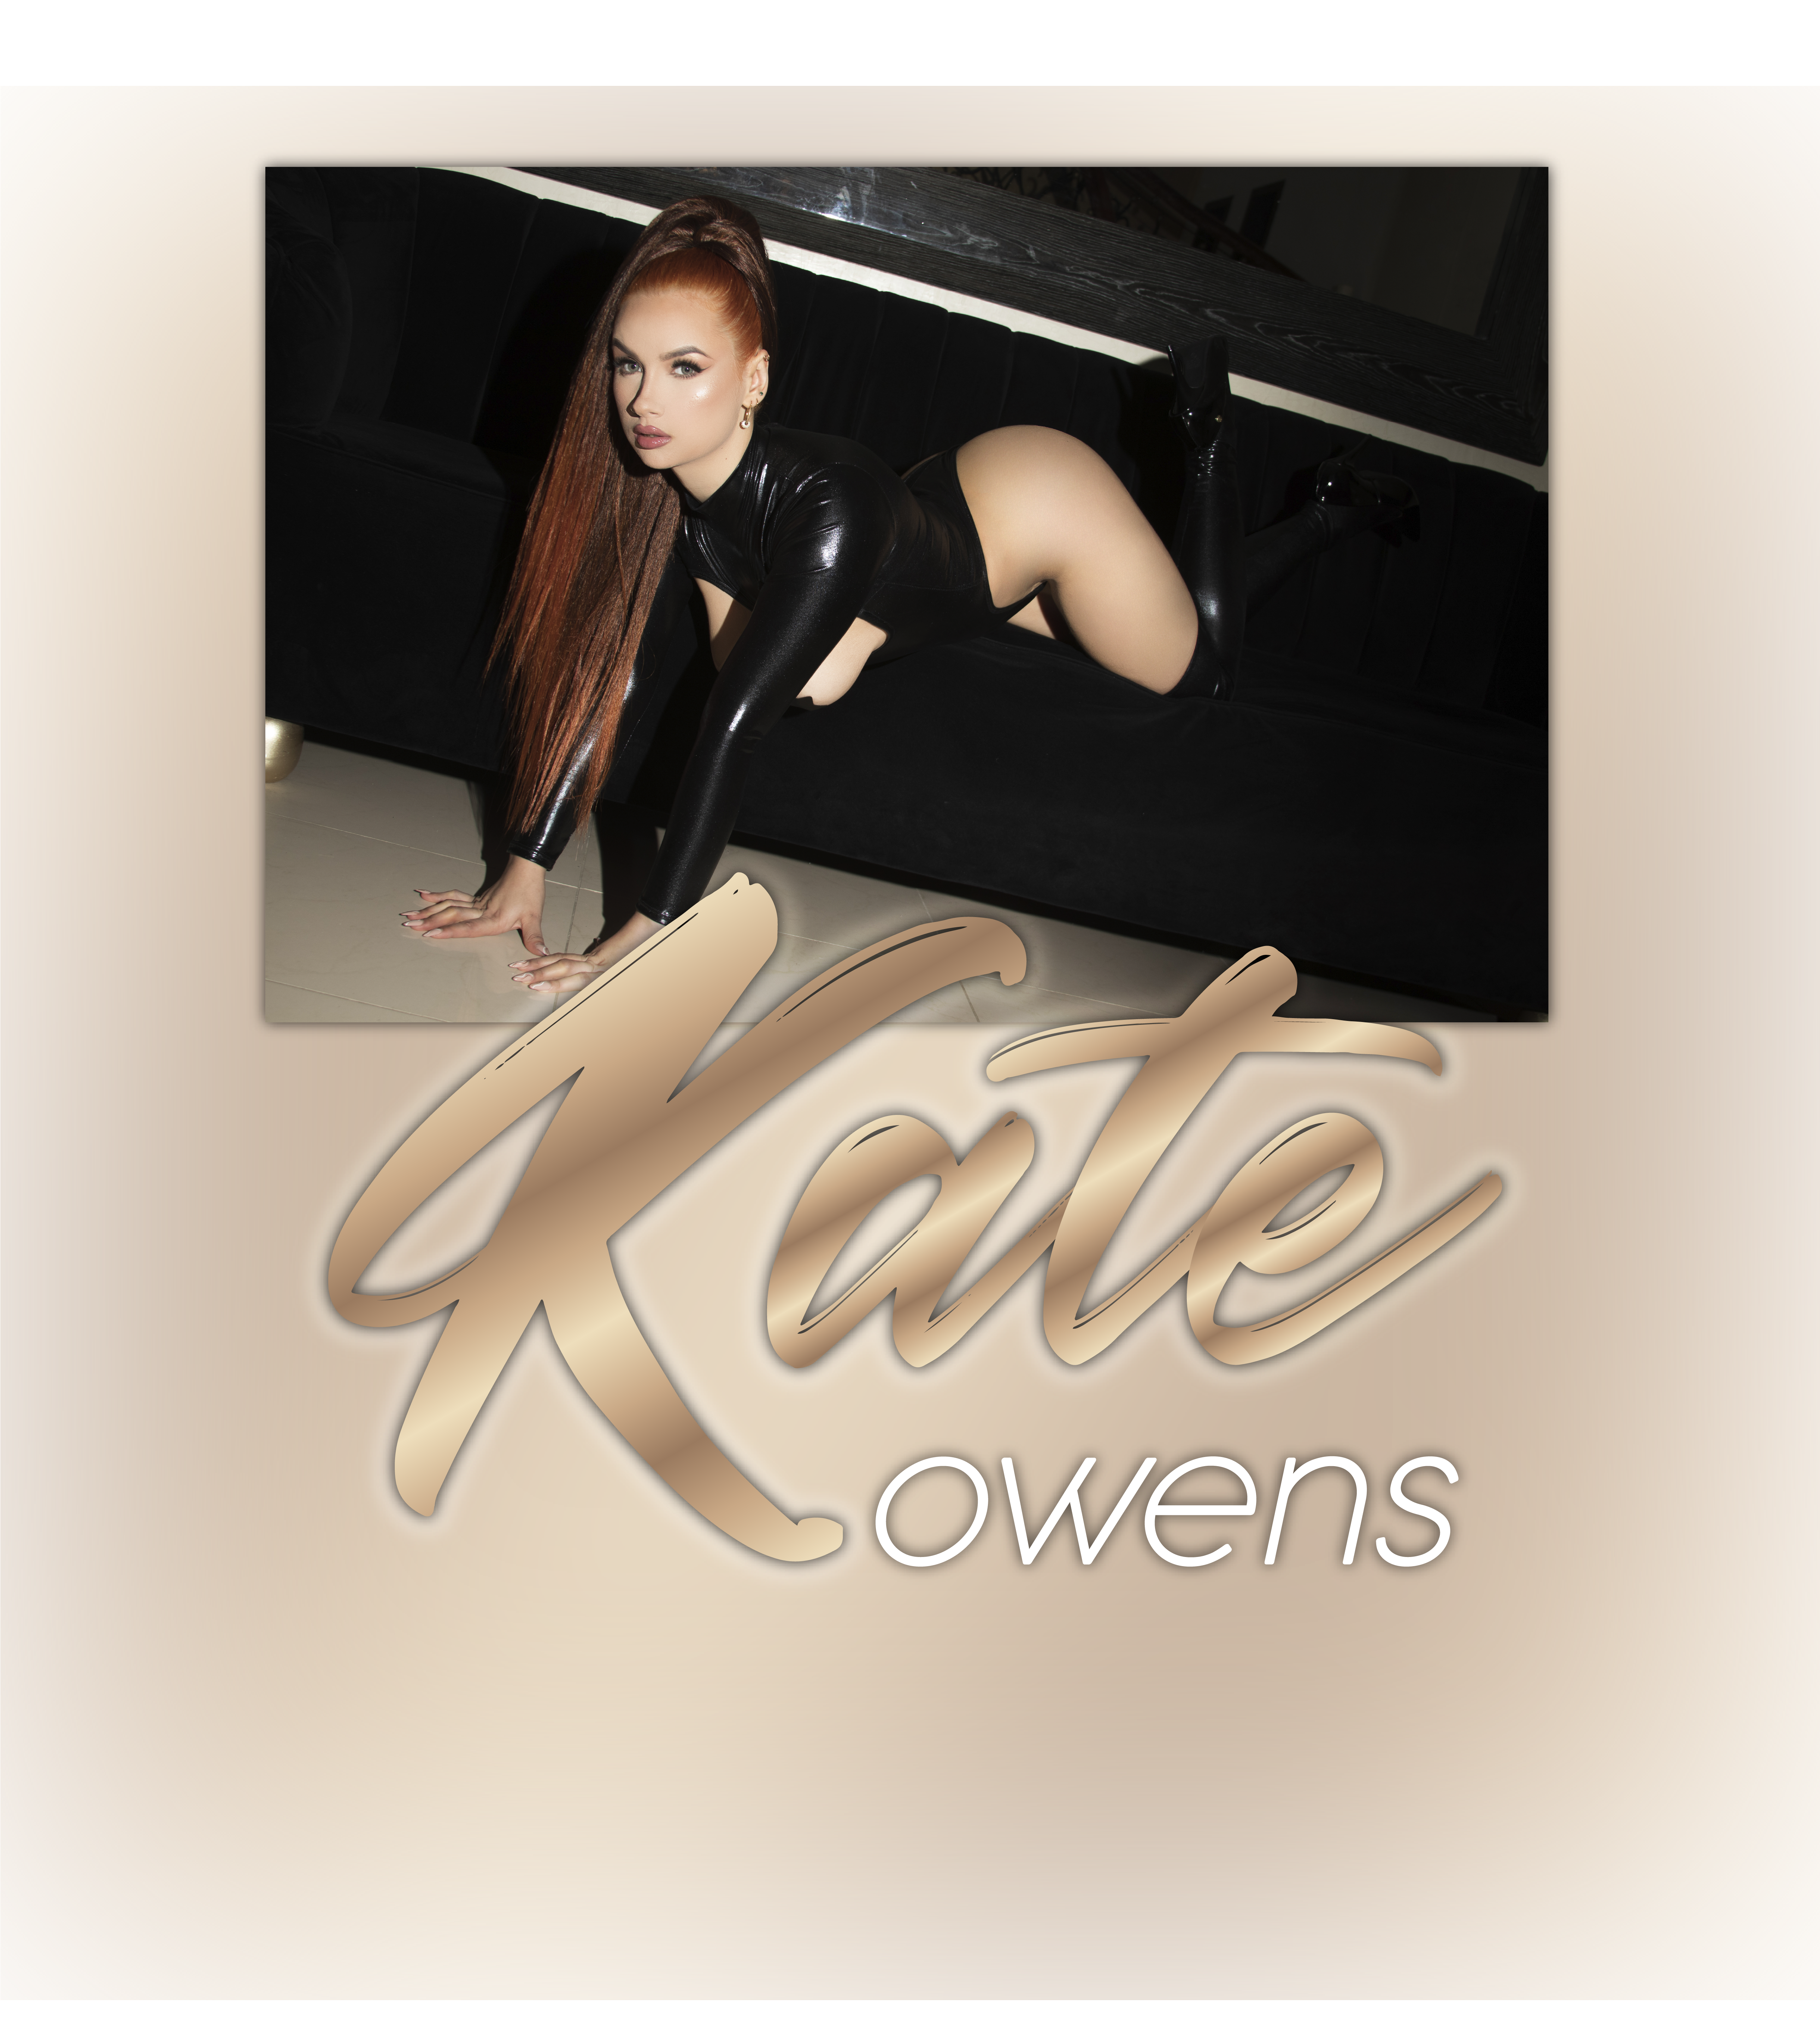 KateOwens Welcome image: 1